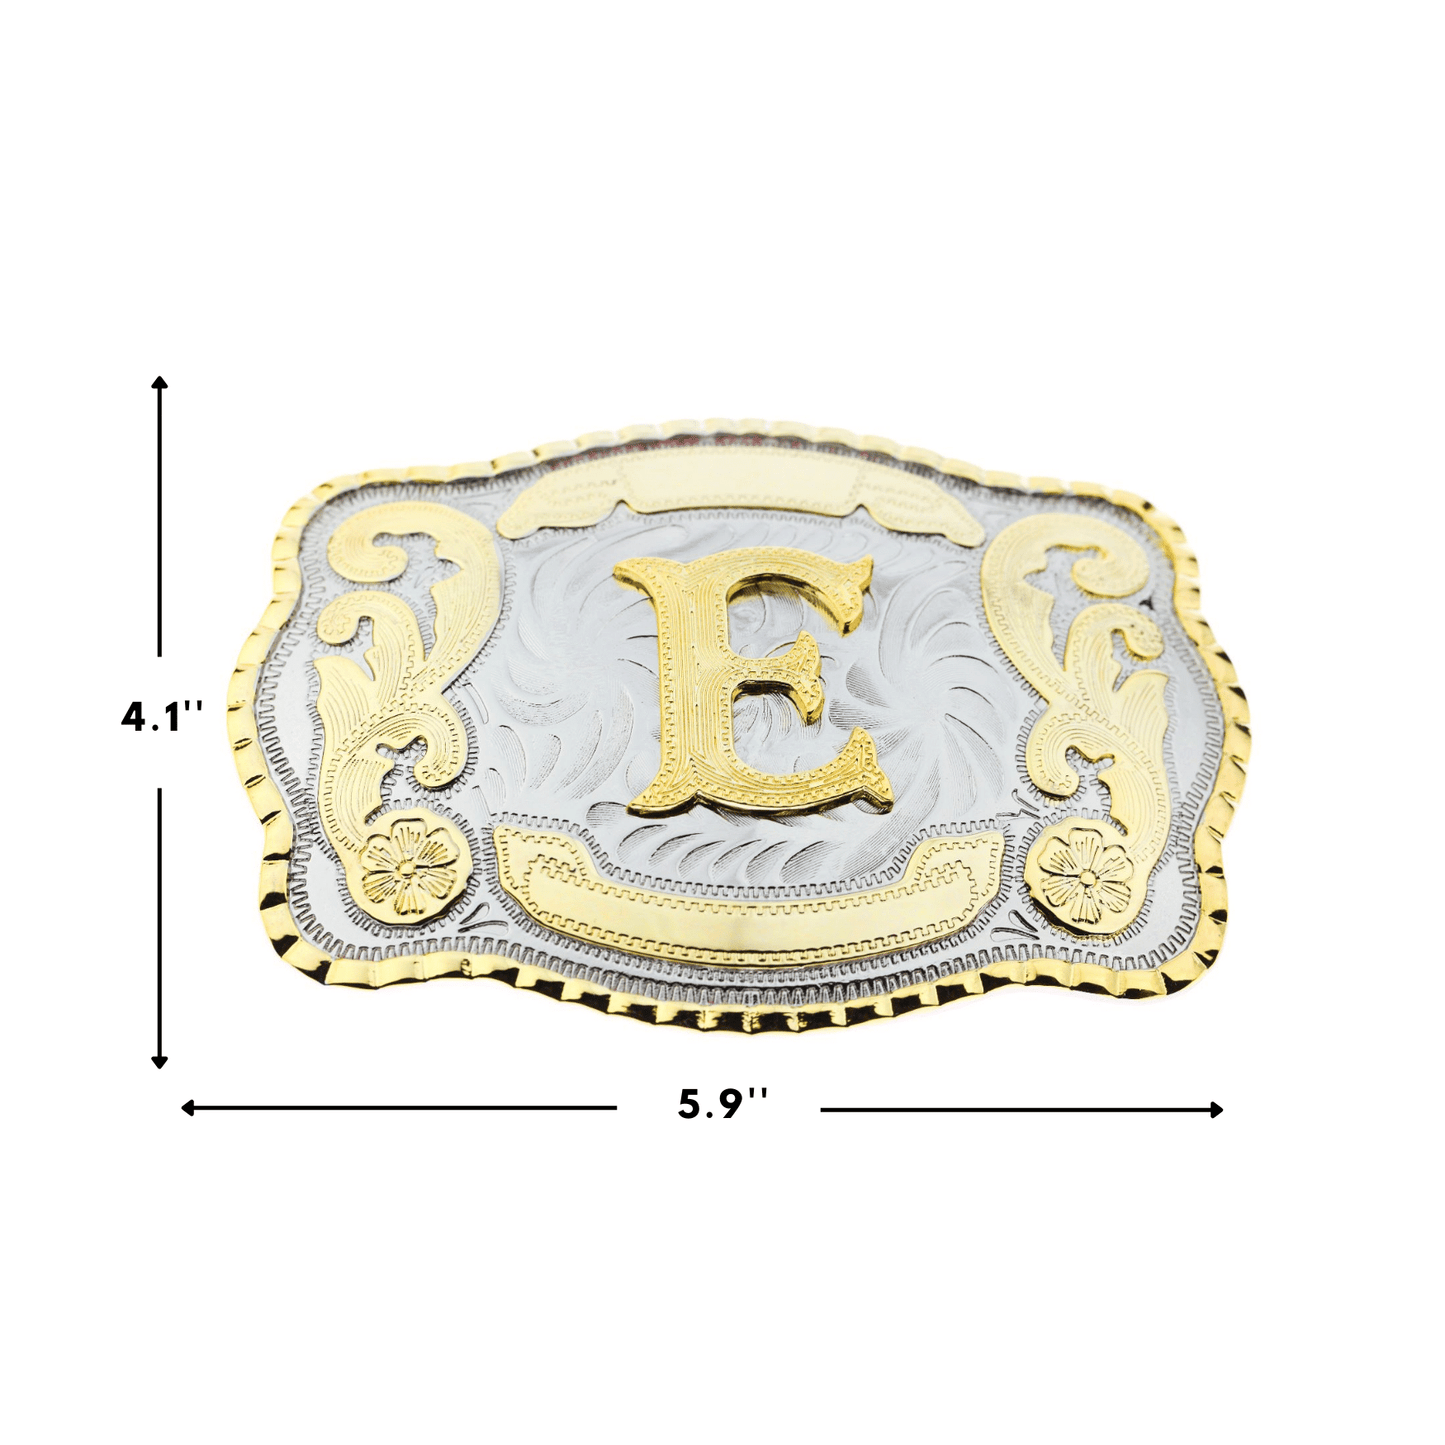 Initial Letter "E" Cowboy Rodeo Western Large Gold Tone Belt Buckle